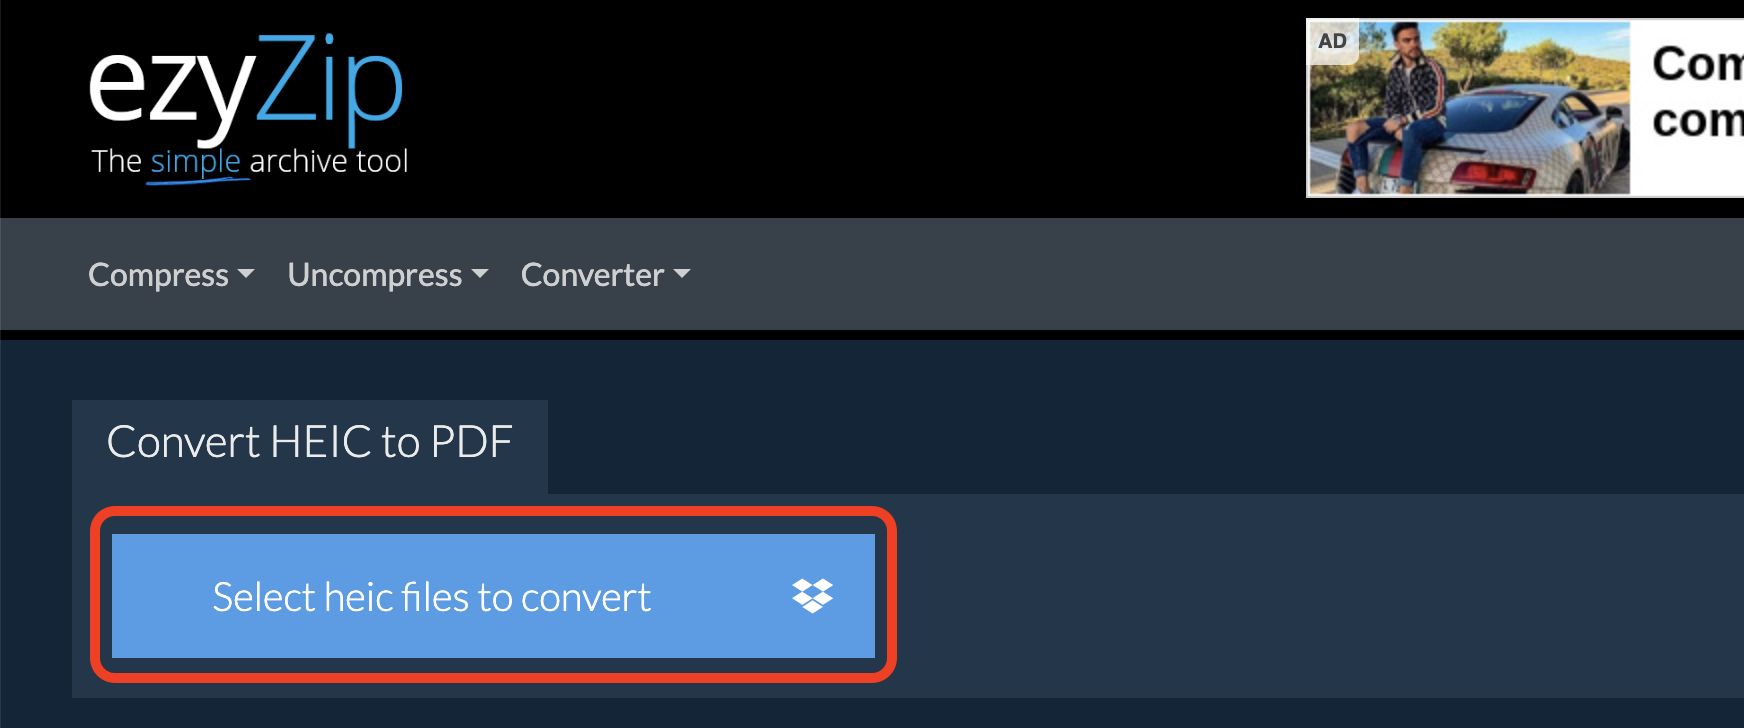 How To Convert HEIC to PDF on Browser with ezyZip: Step 2